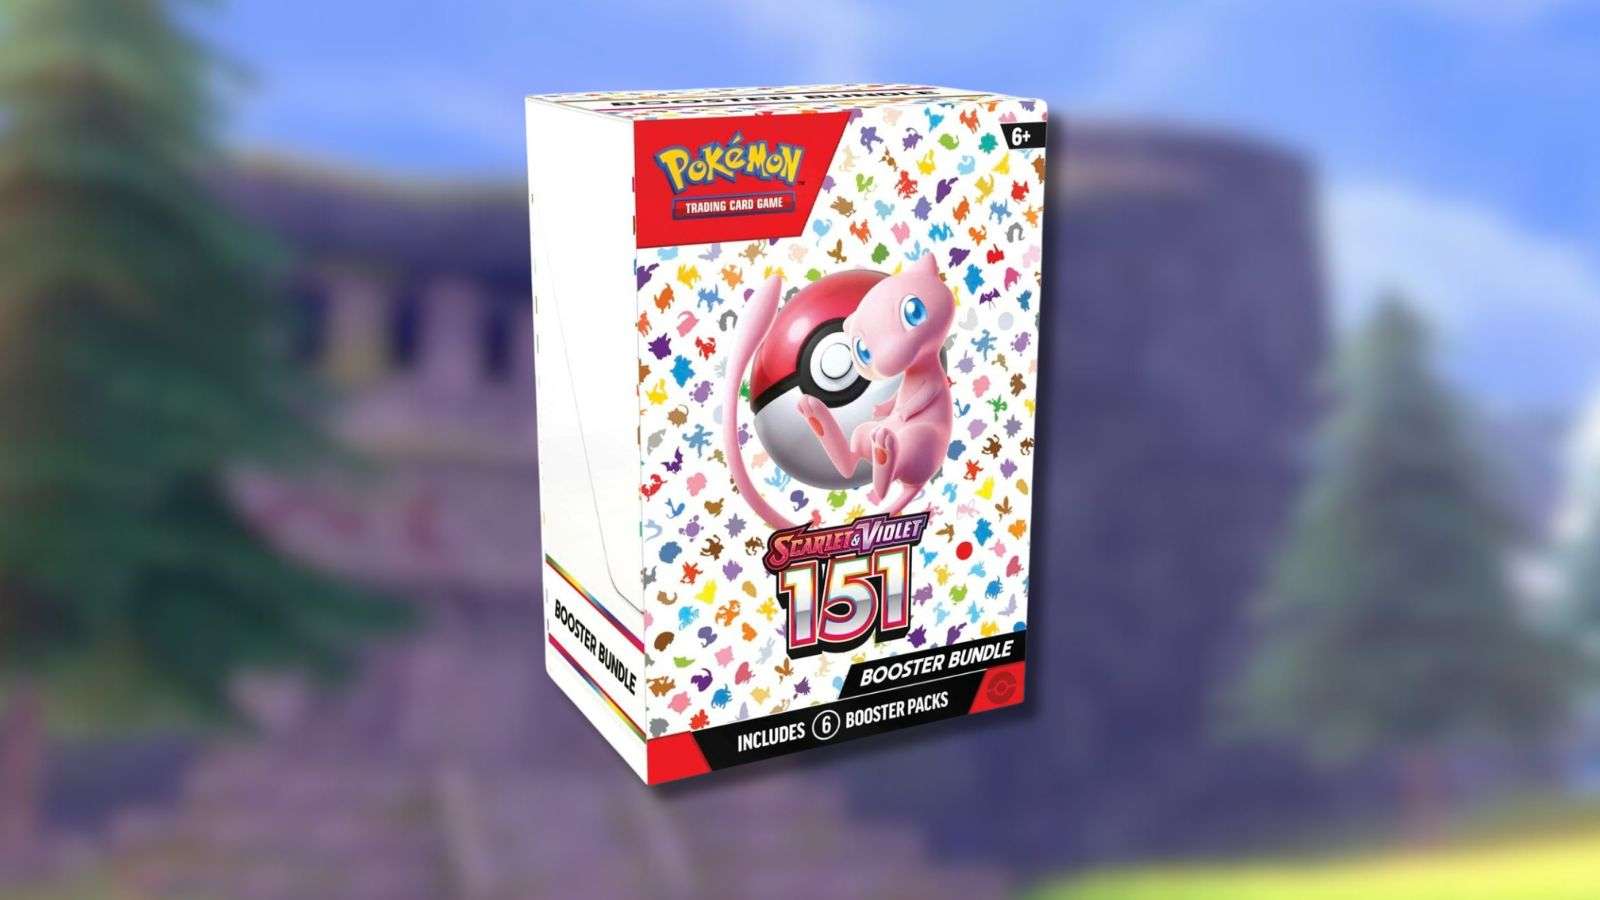 Pokemon 151 Booster Bundle with game background.